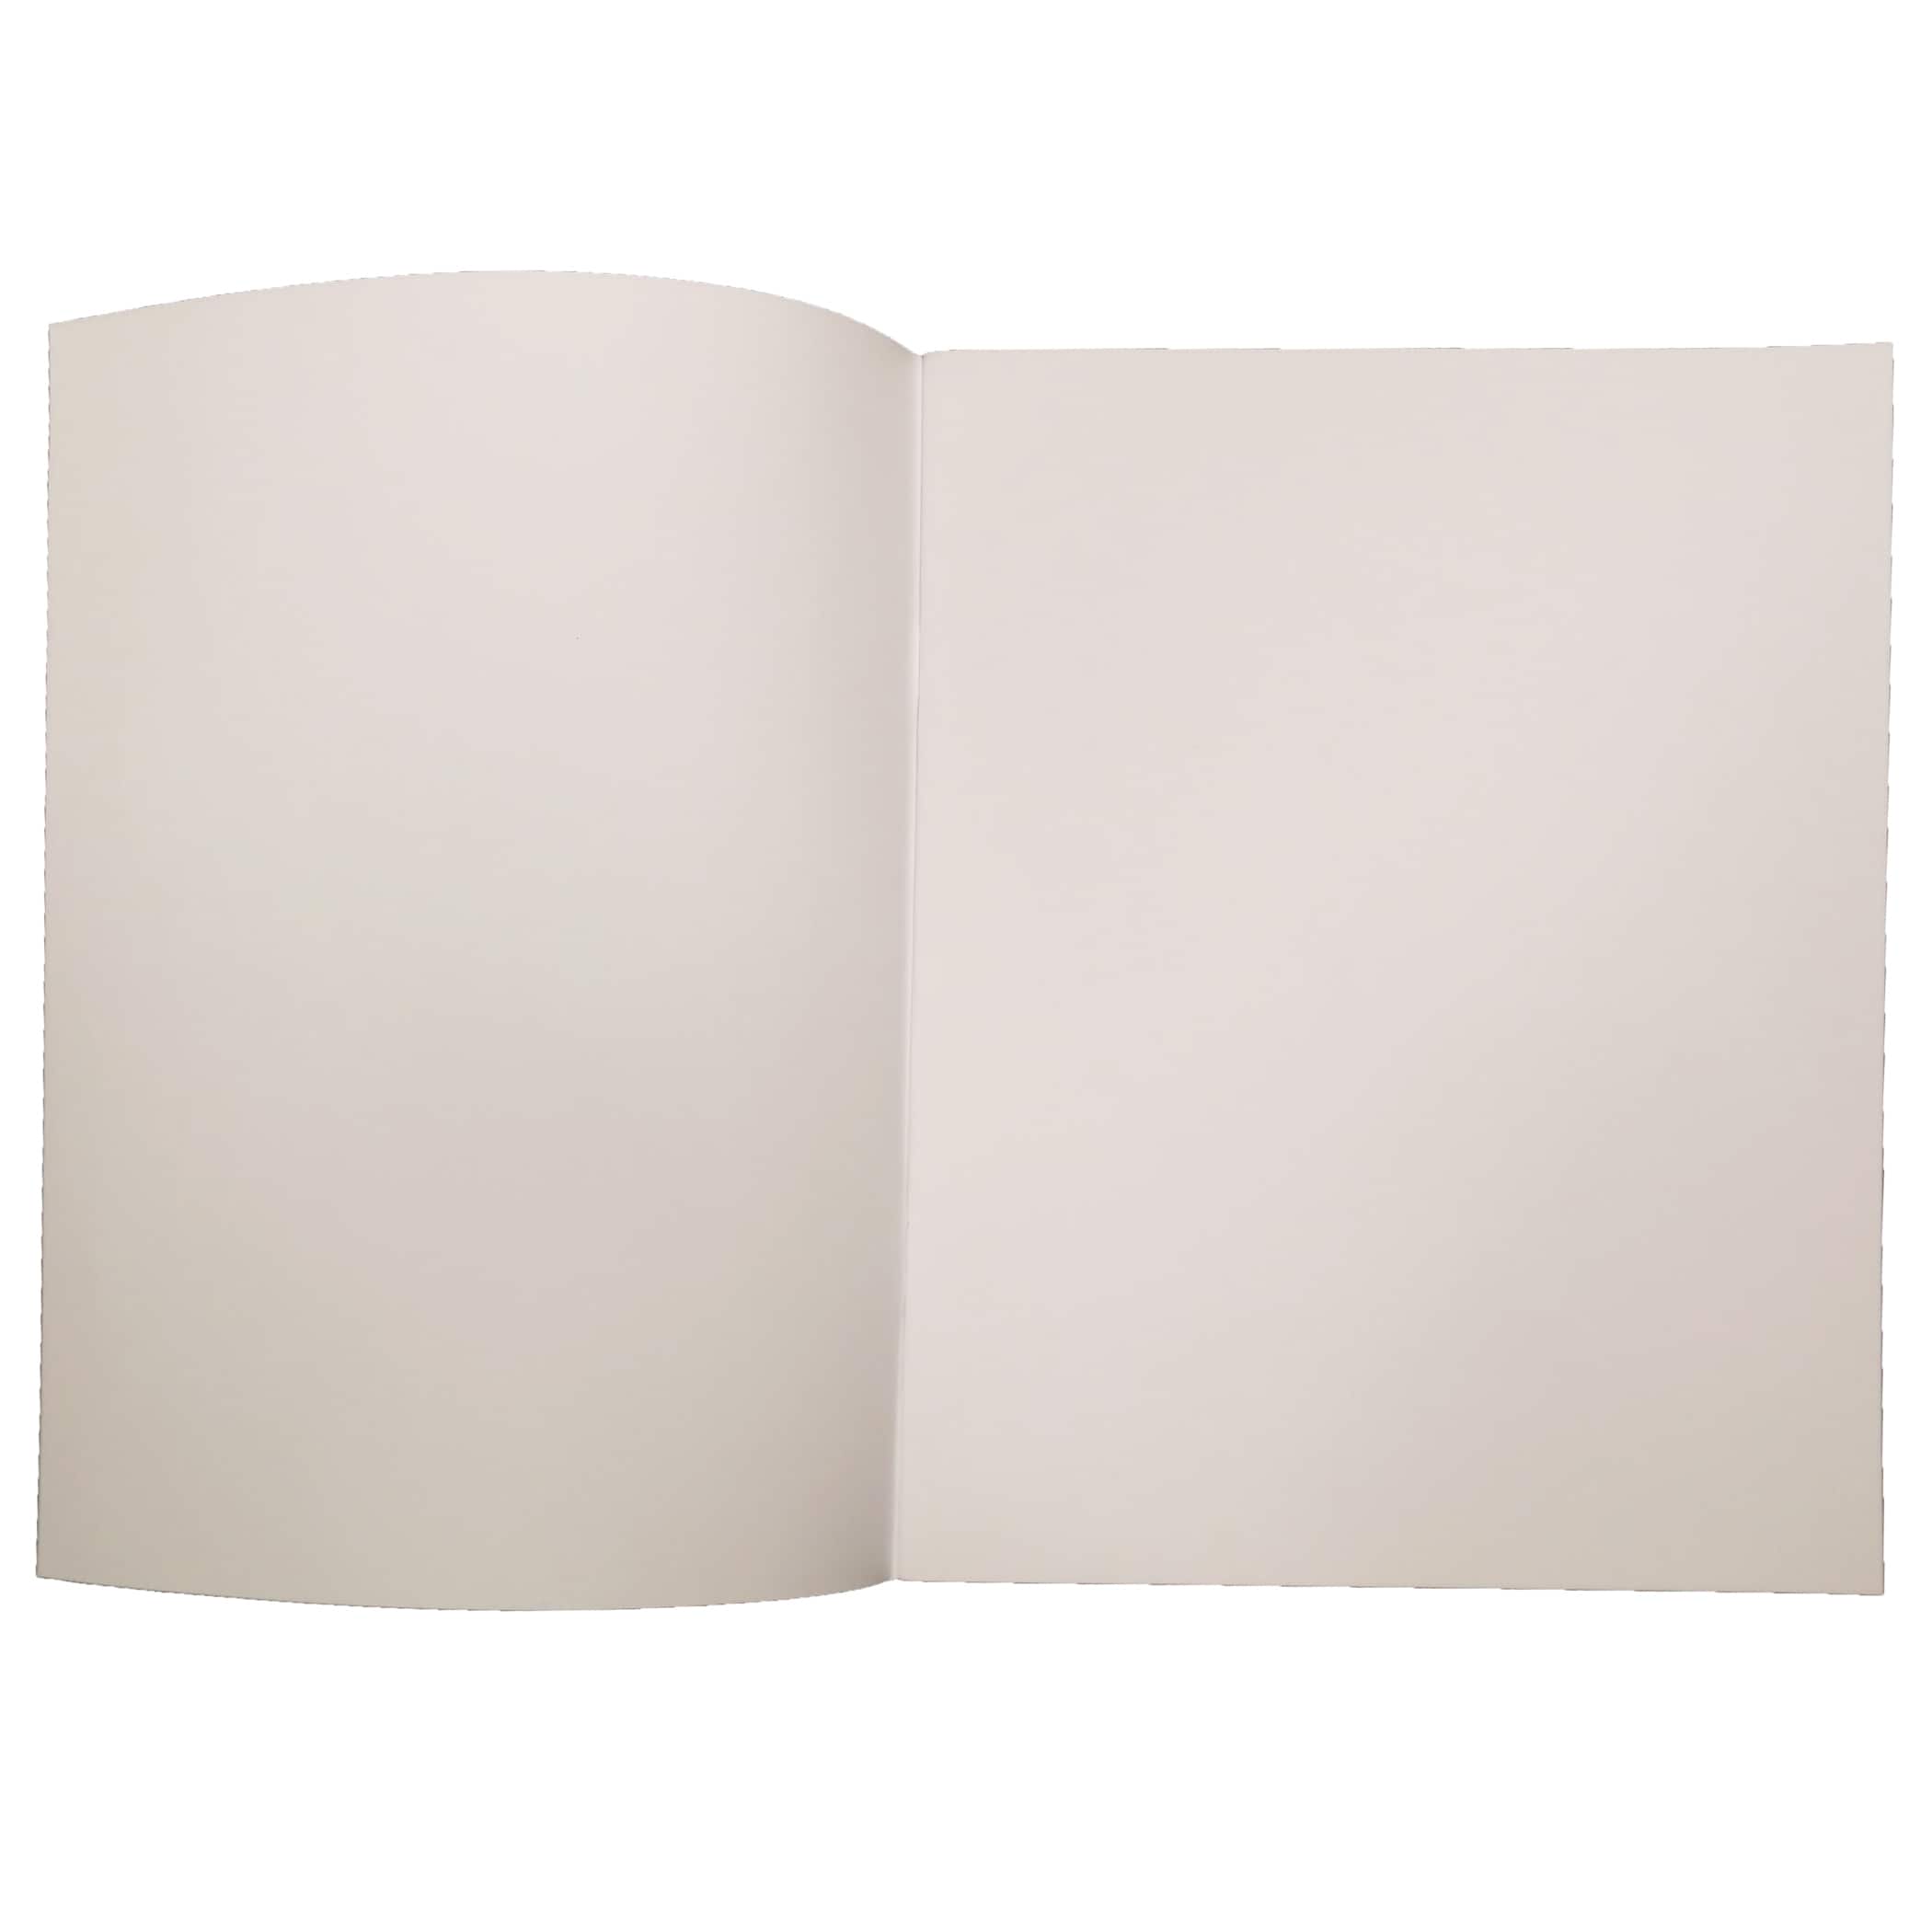 Hygloss Blank Books: White, 5.5 x 8.5, 32 Pages, 10 Books